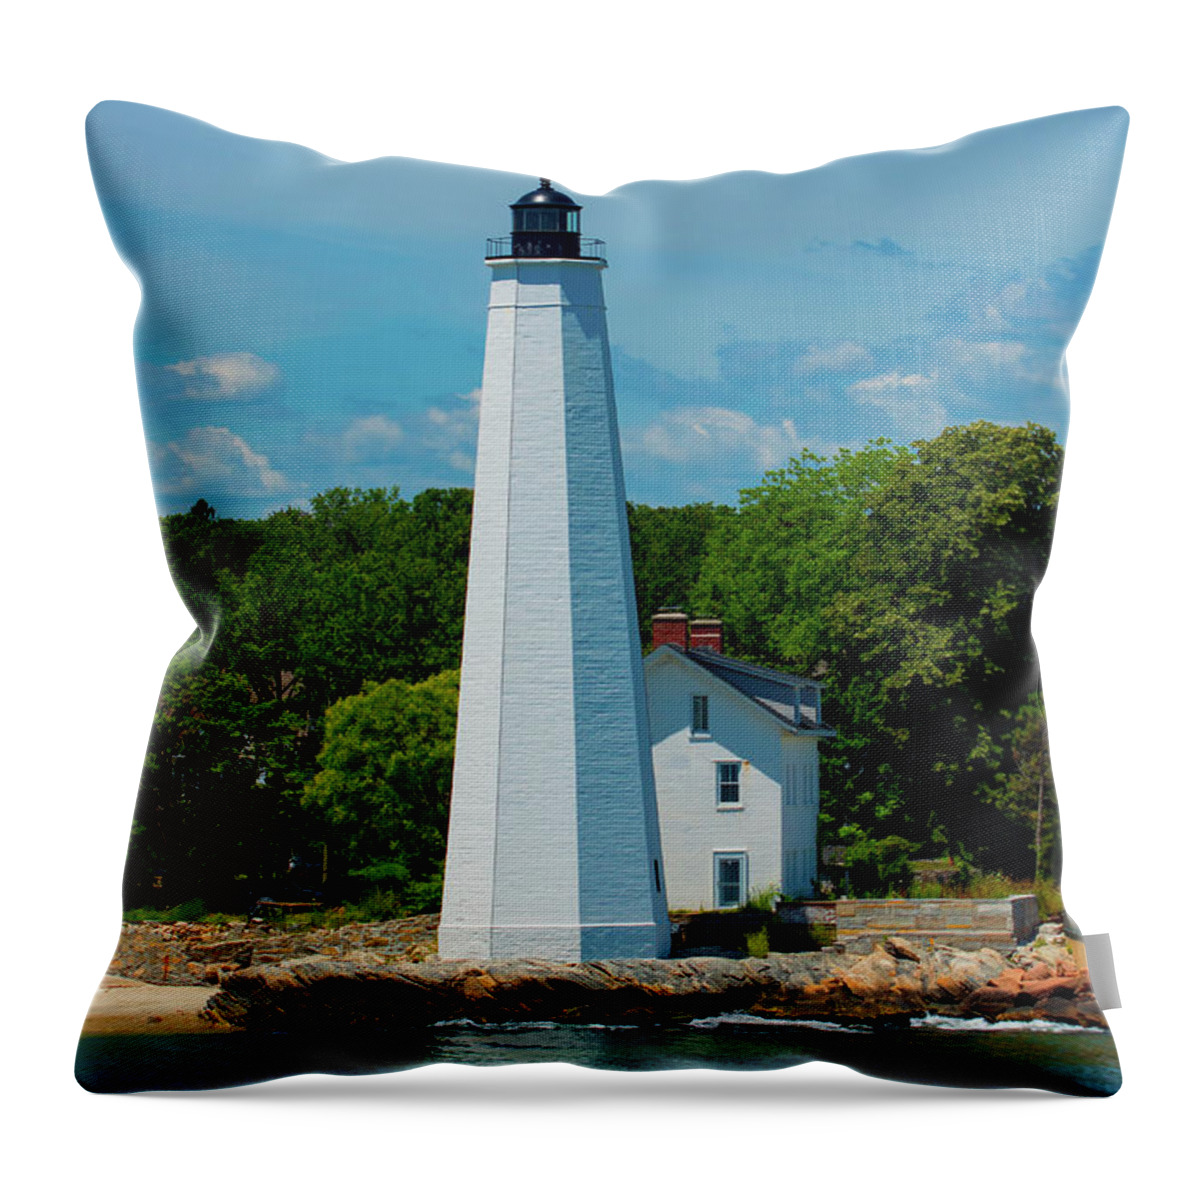 Connecticut Throw Pillow featuring the photograph Welcome Light by Joe Geraci